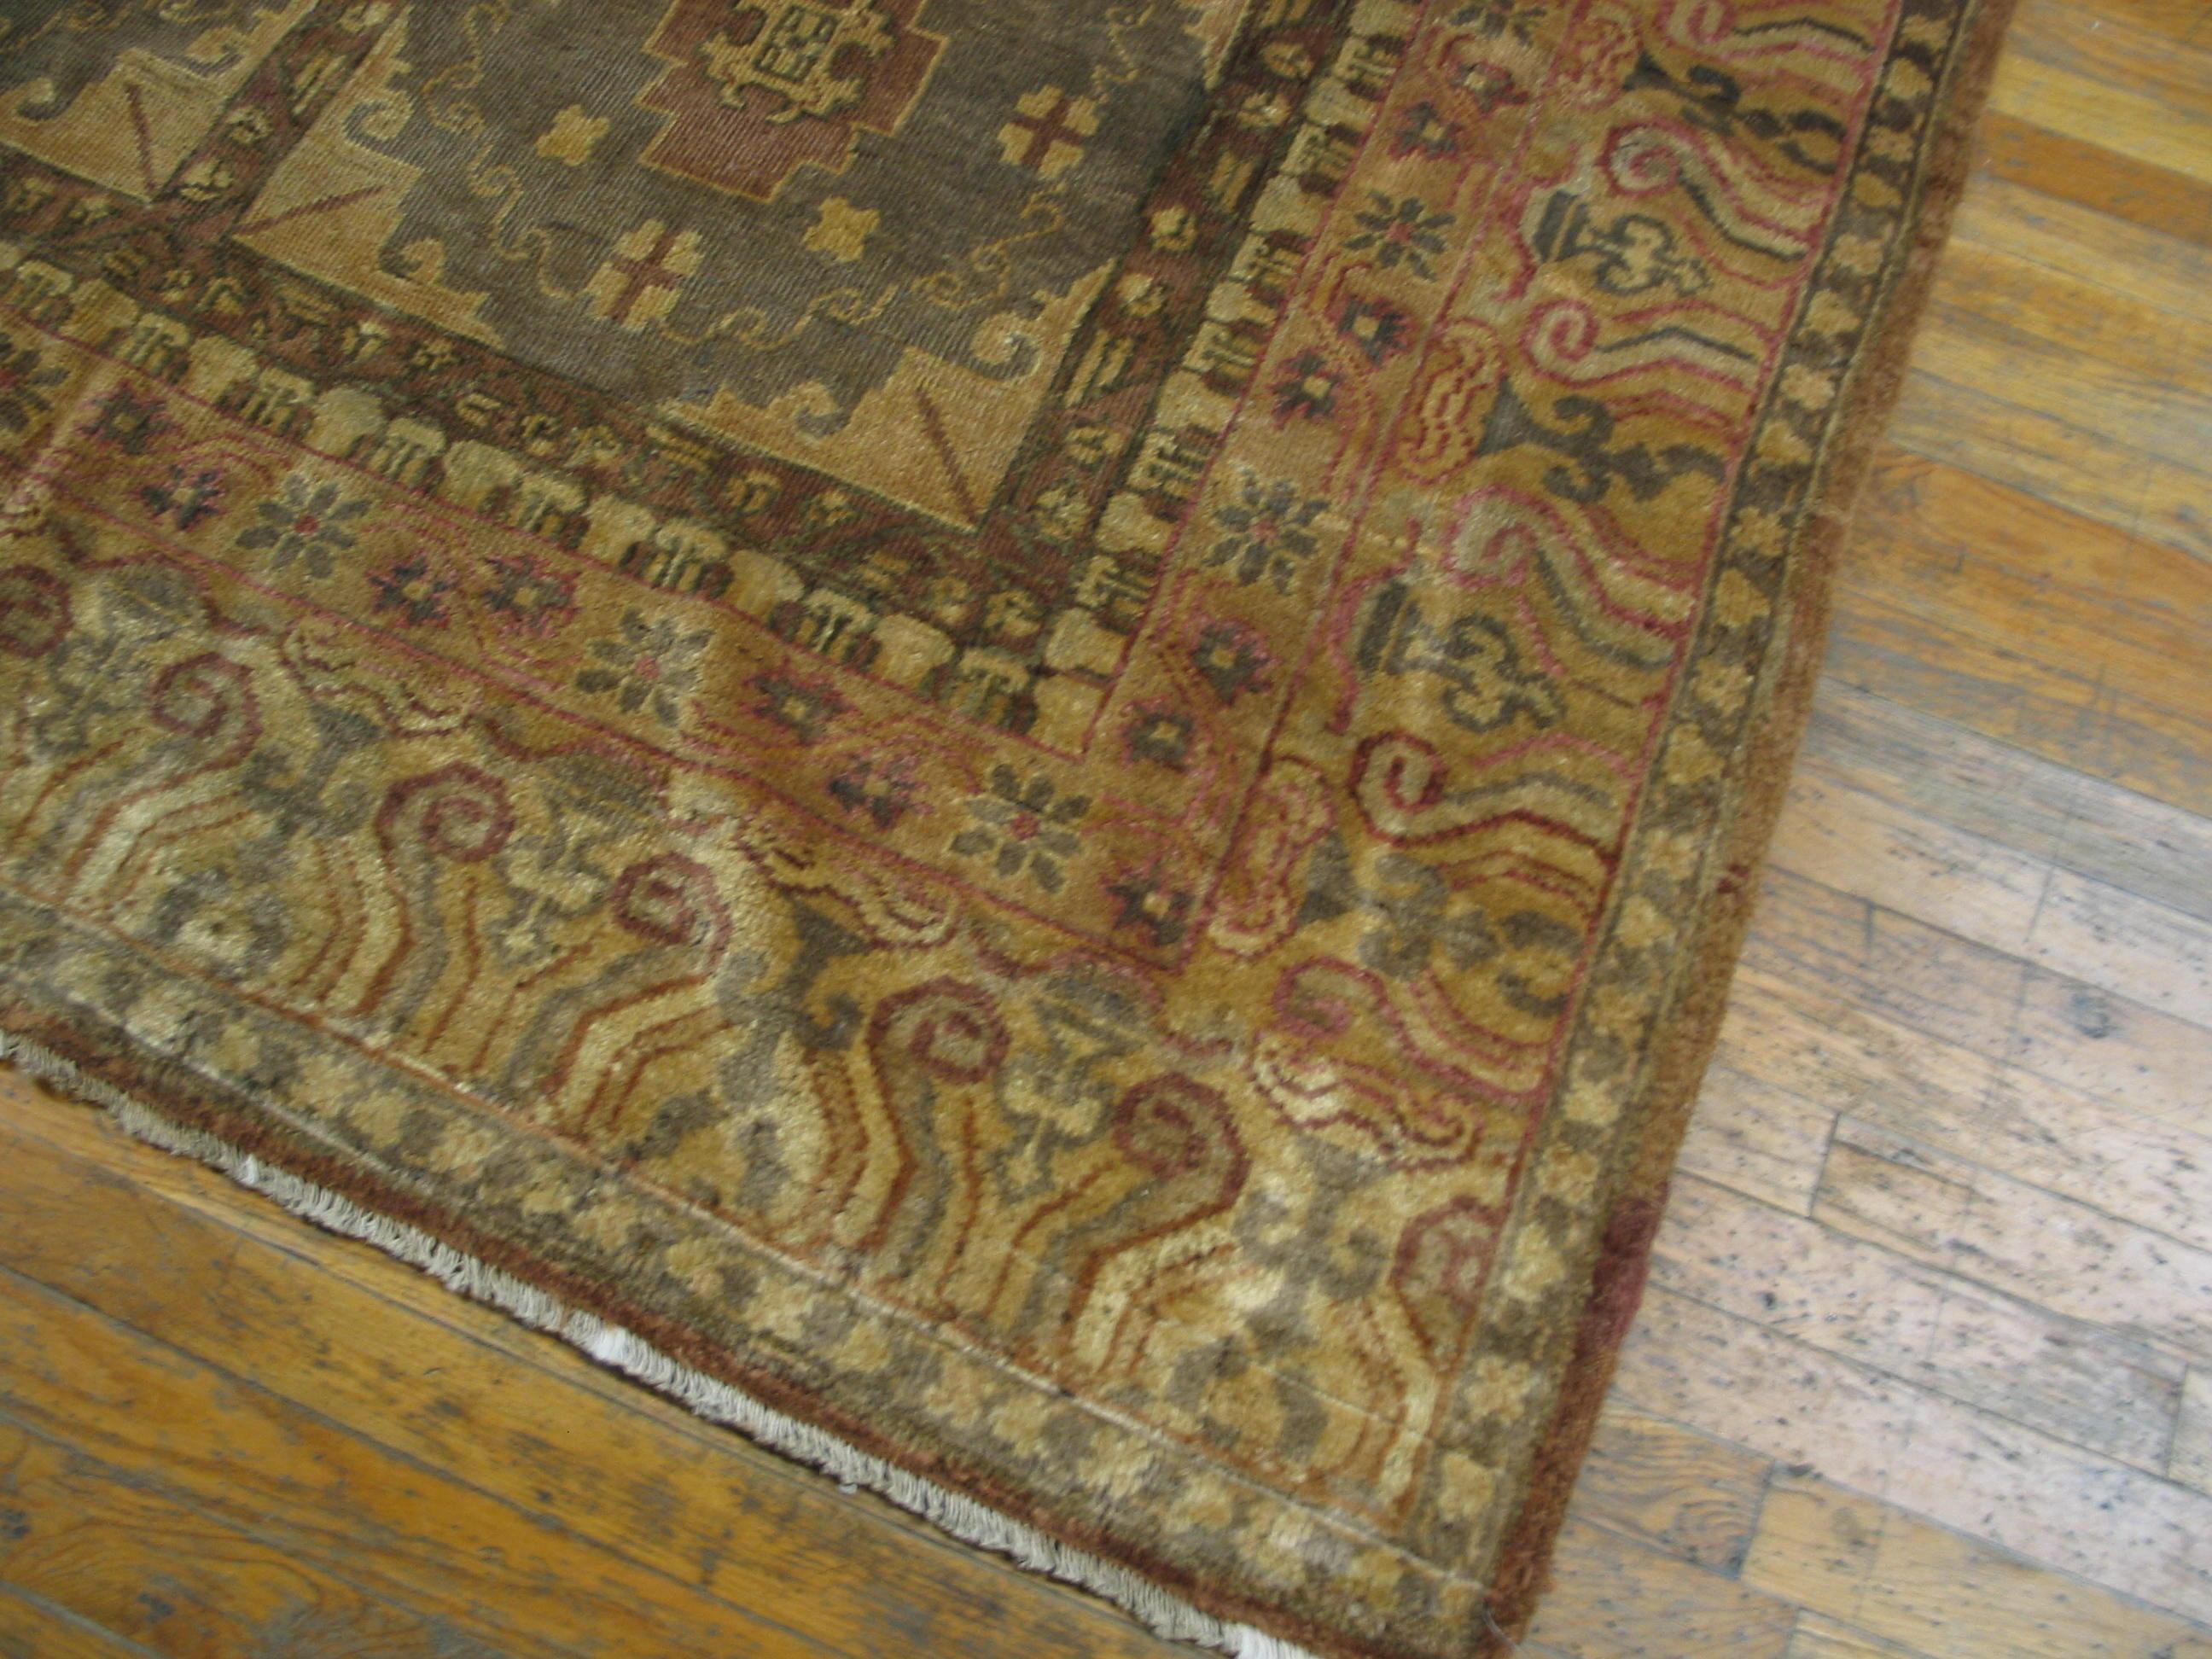 Early 20th Century Central Asian Chinese Khotan Carpet (6'3